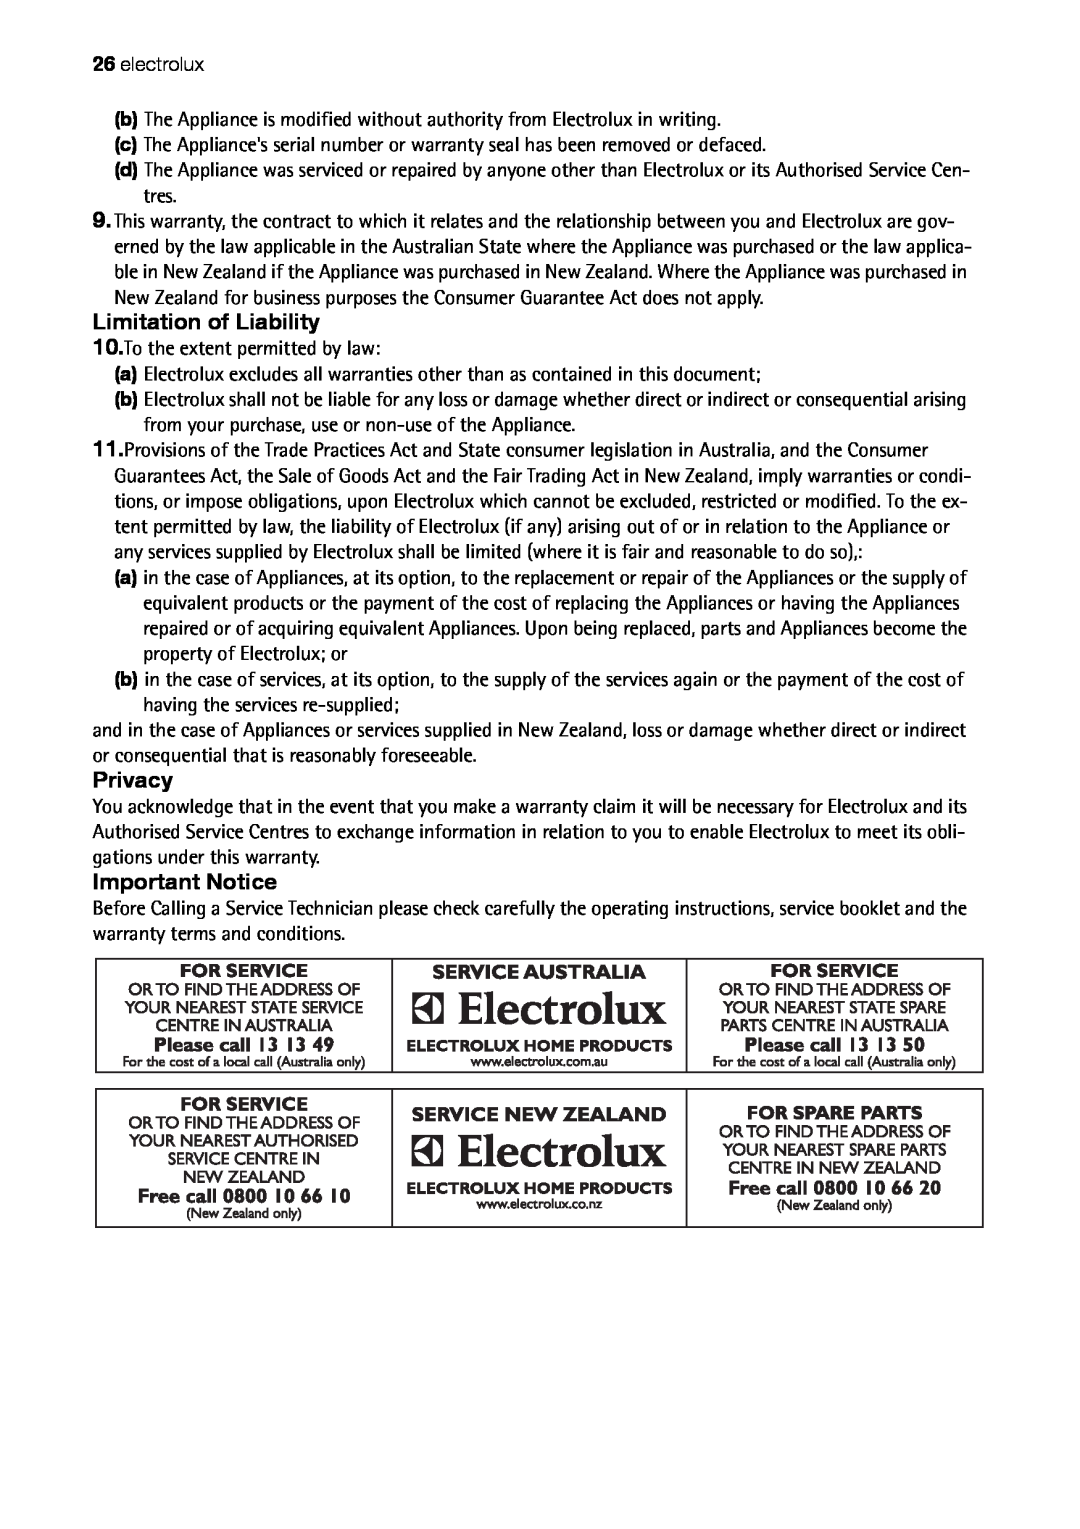 Electrolux EHD 60150 IAU user manual Limitation of Liability, Privacy, Important Notice 